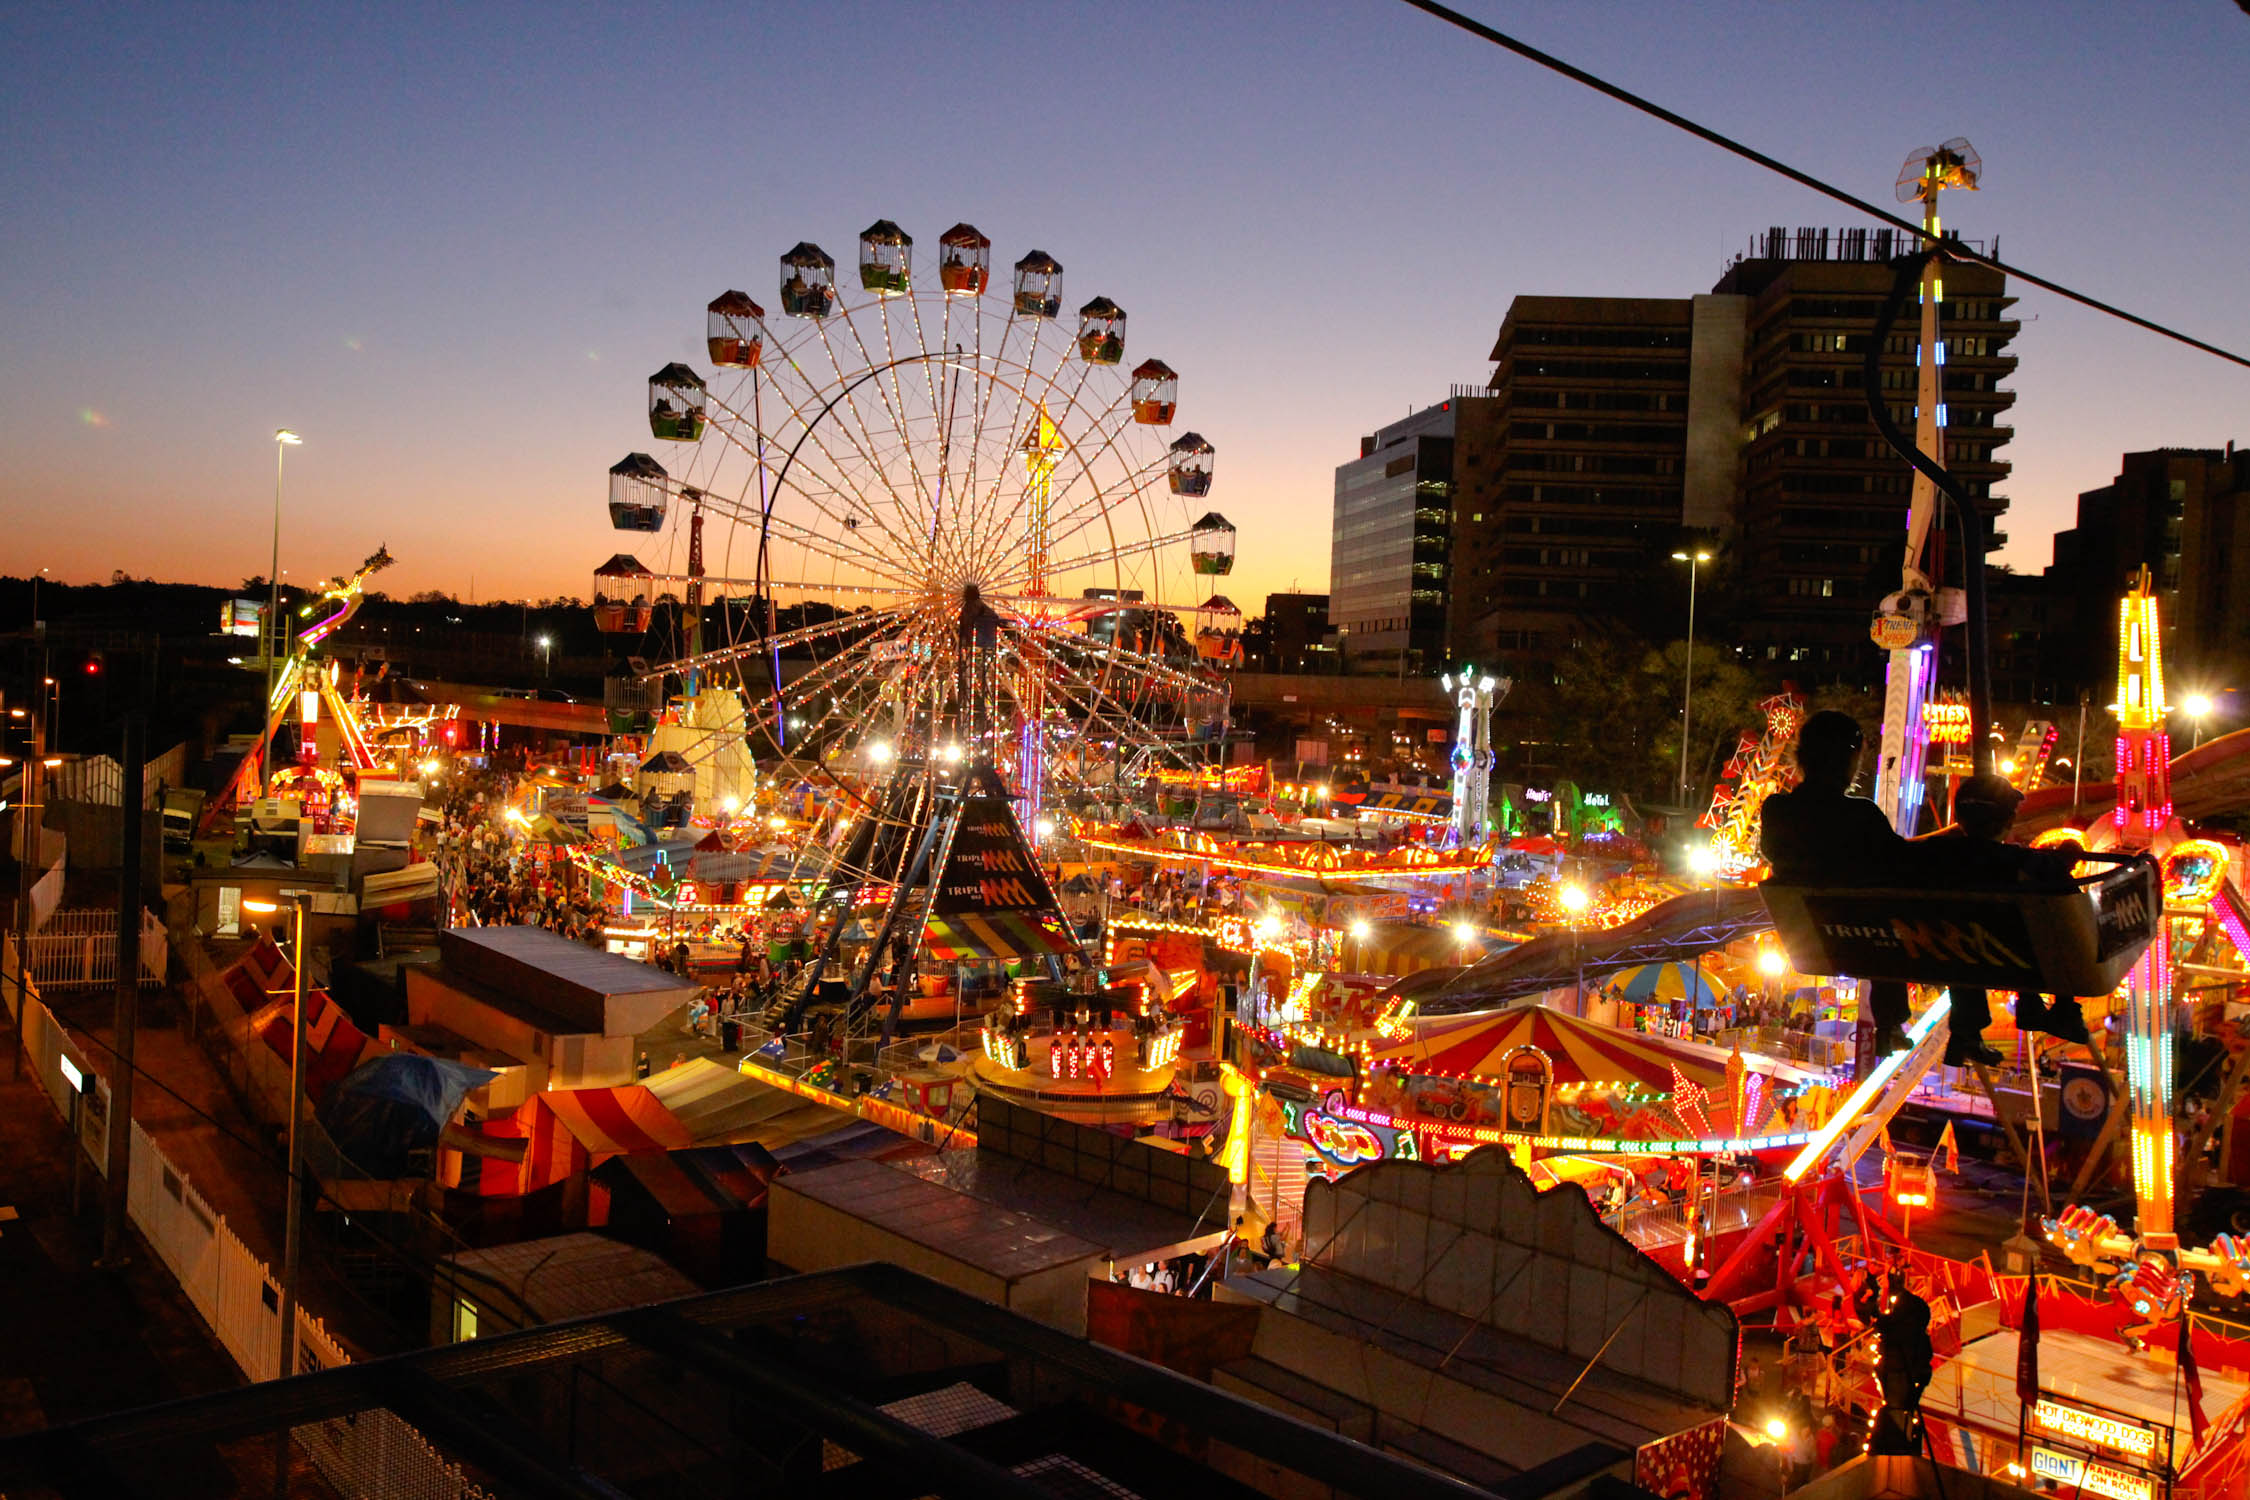 Ekka Show - Overlook picture of the rides